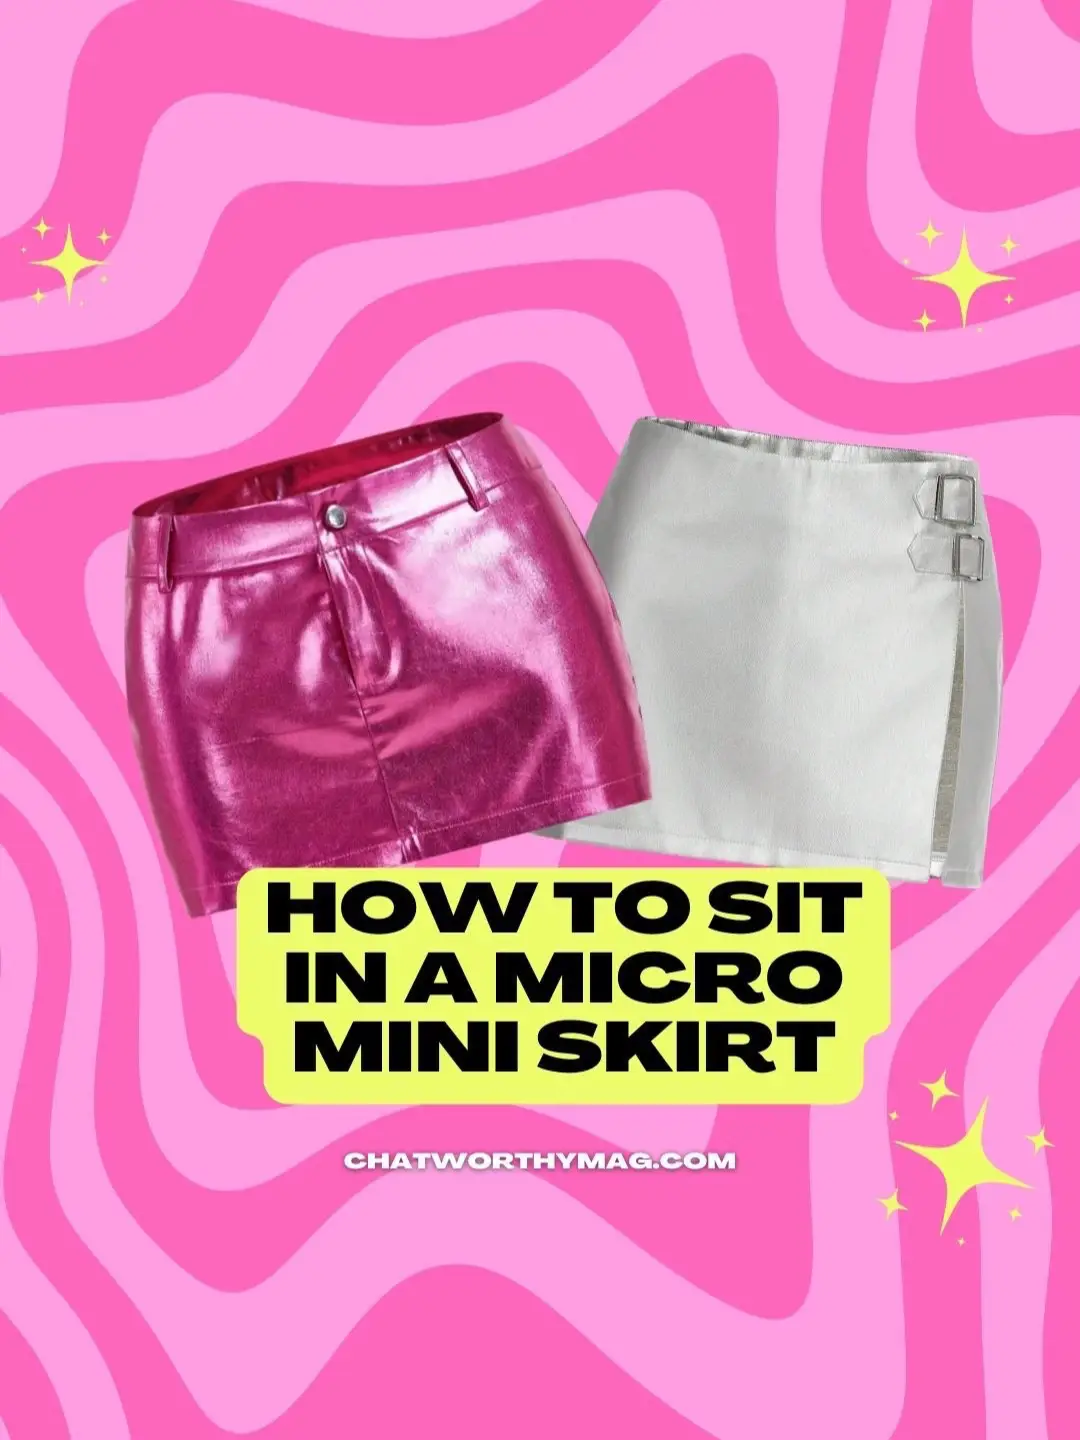 How to sit in a micro mini skirt!, Video published by ChatworthyStyle